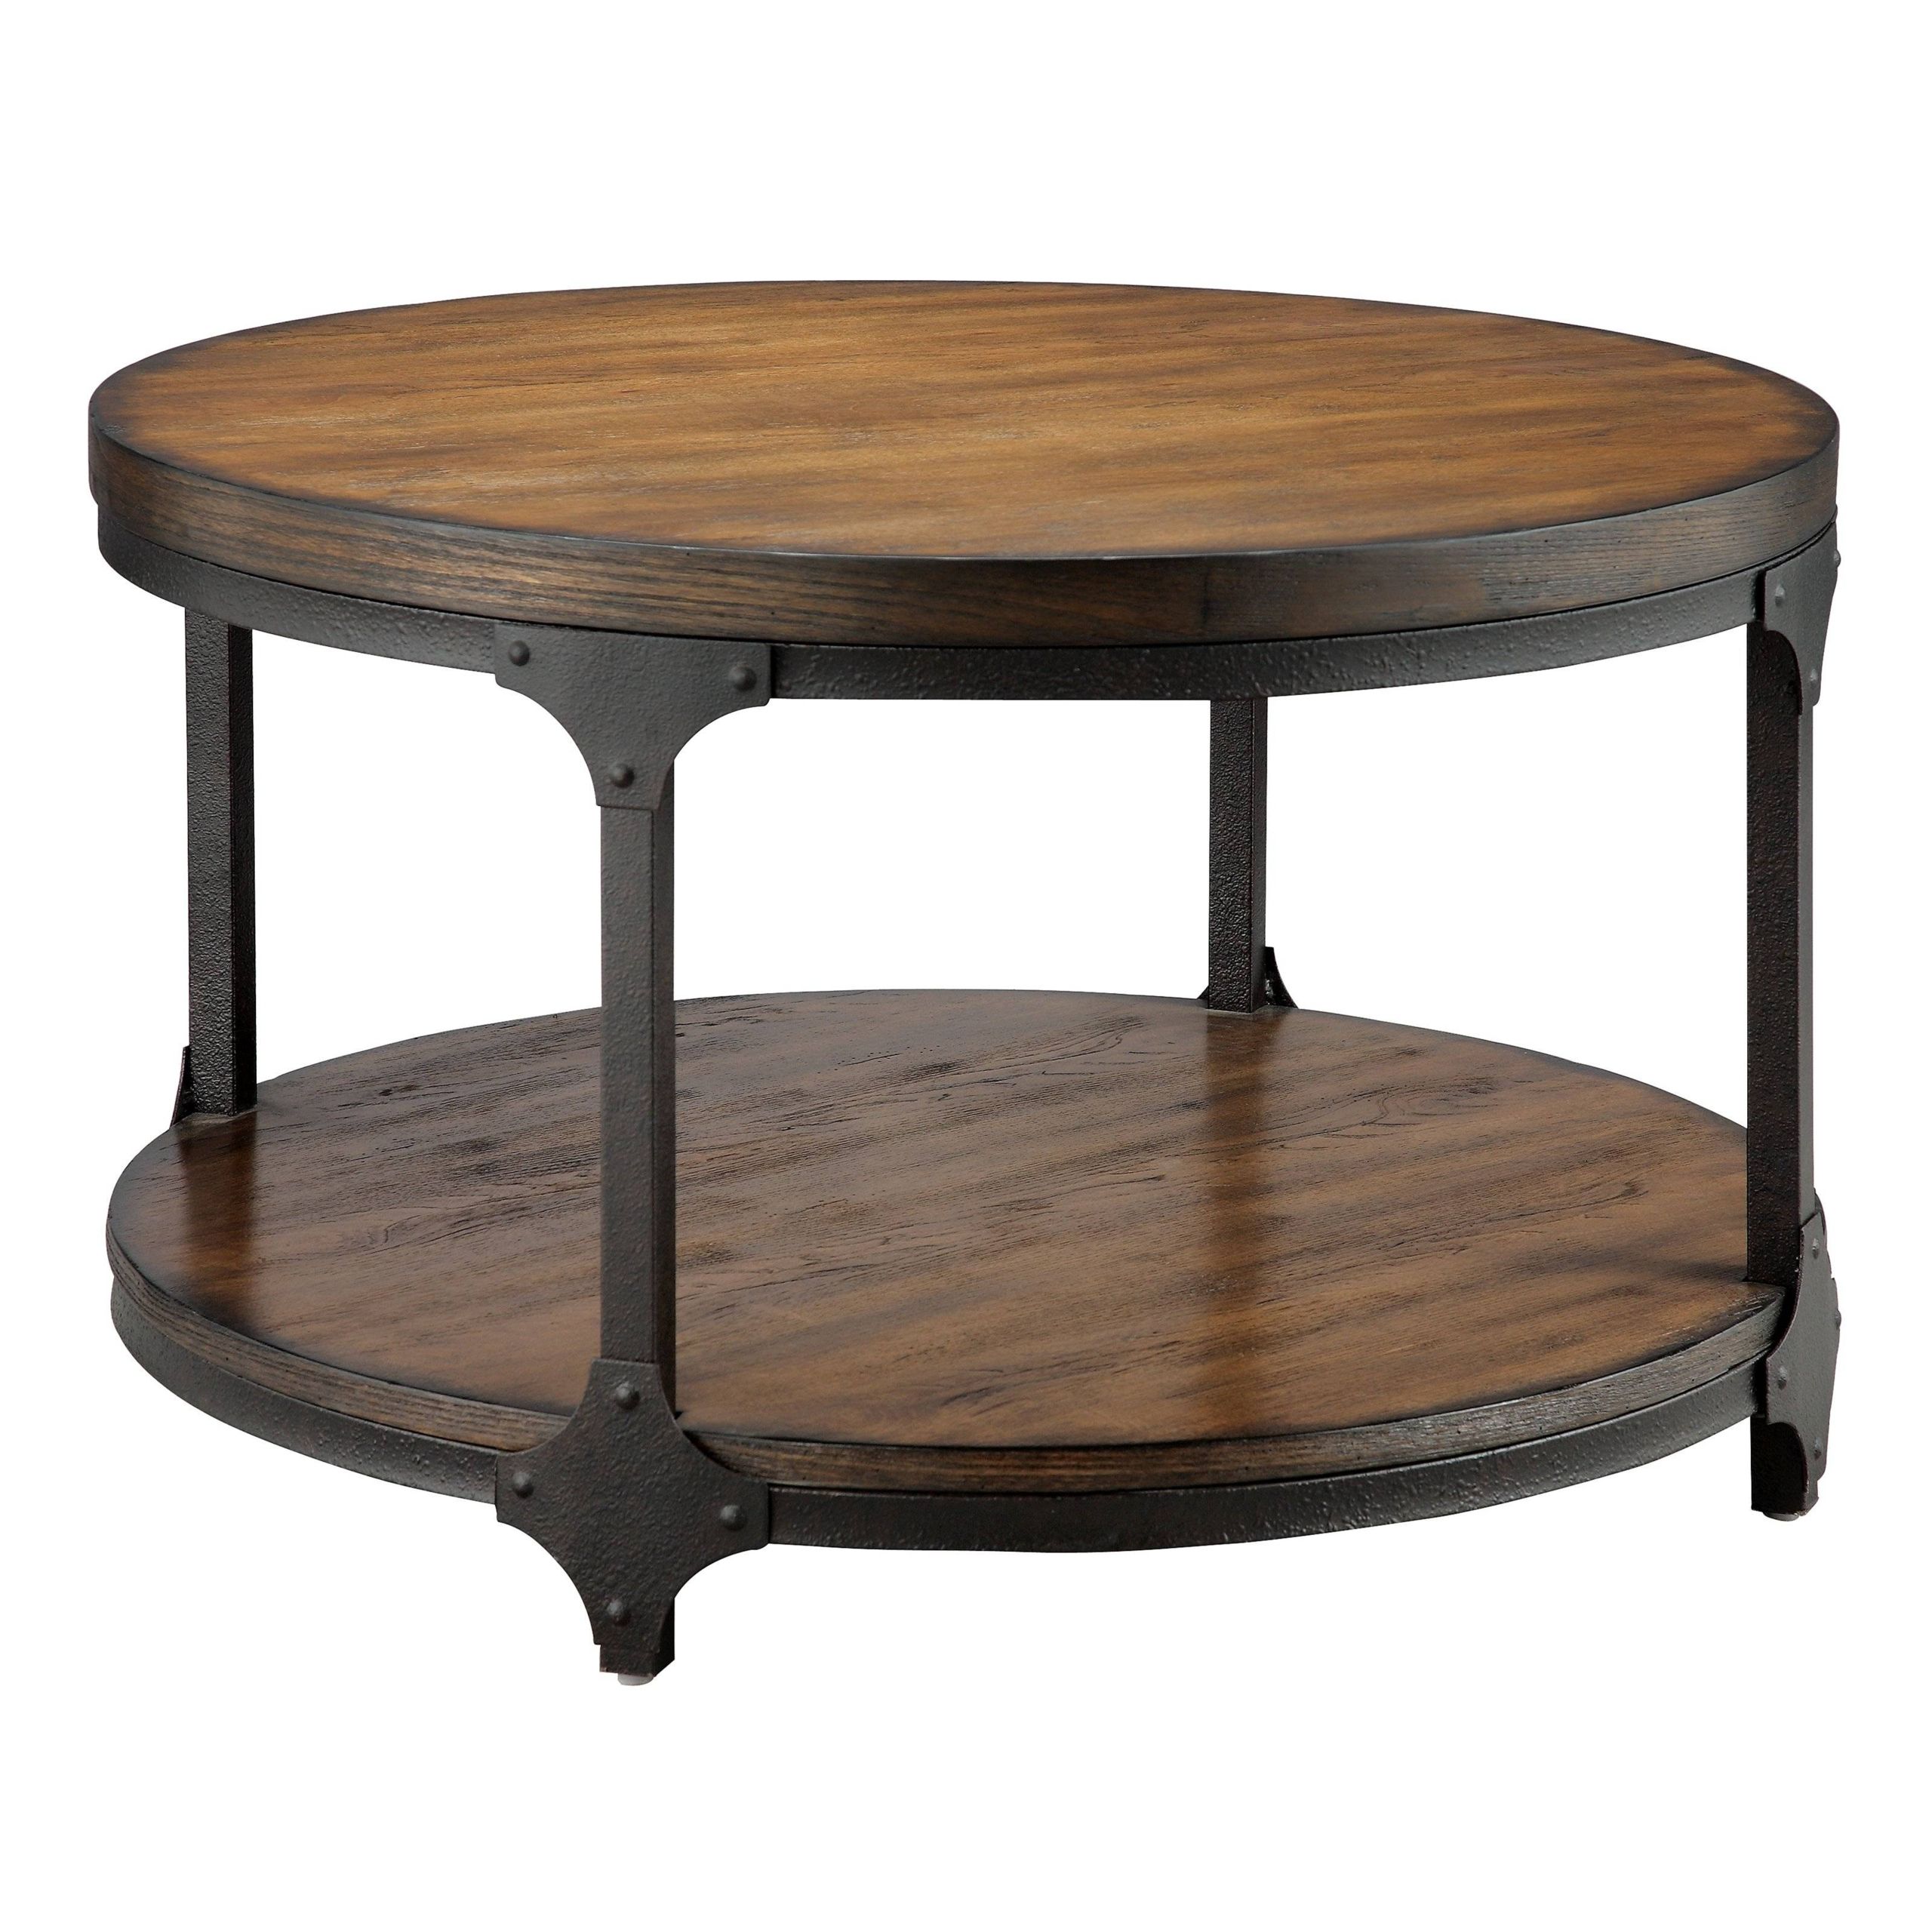 Round Industrial Coffee Table – Ideas On Foter Pertaining To Round Industrial Coffee Tables (View 11 of 20)